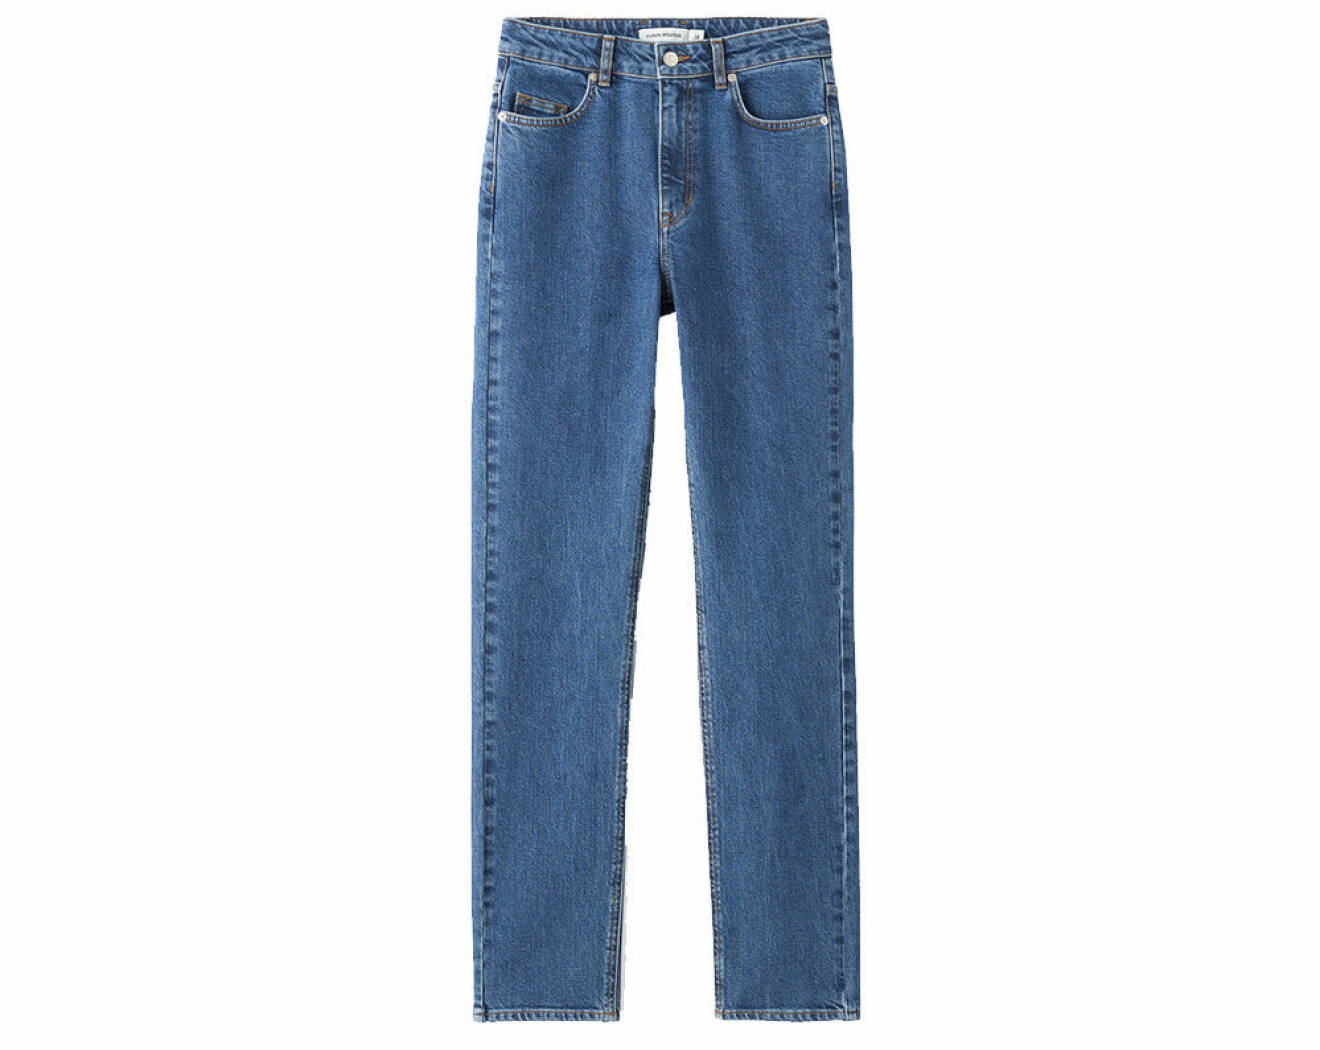 jeans carin wester